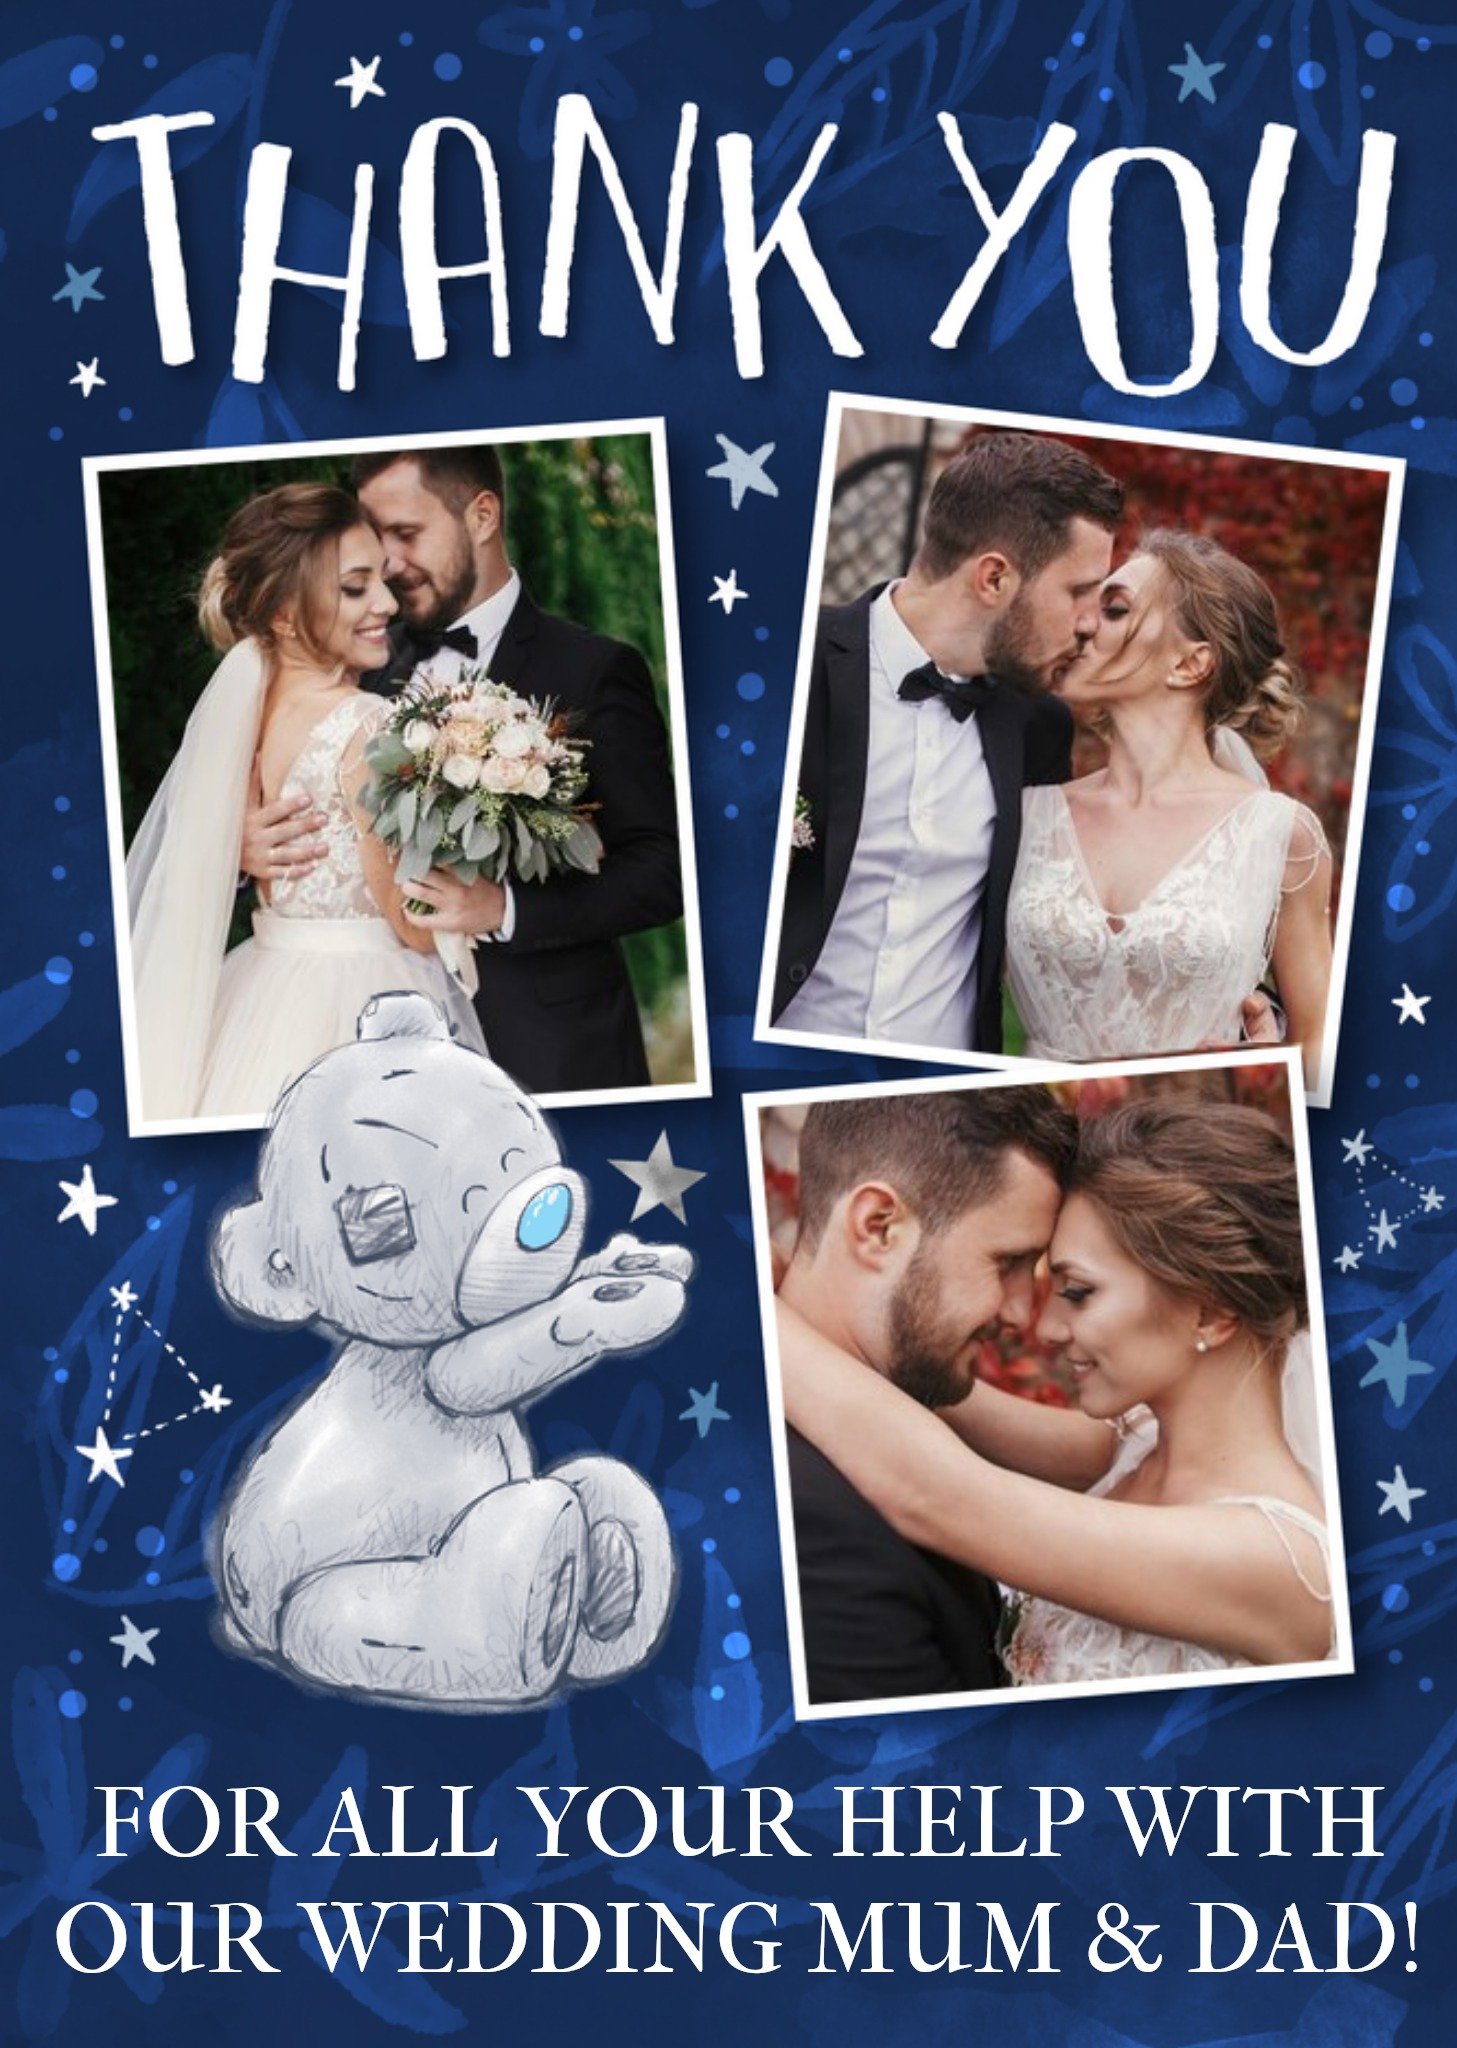 Me To You Tatty Teddy Space Thank You Wedding Photo Upload Card, Large